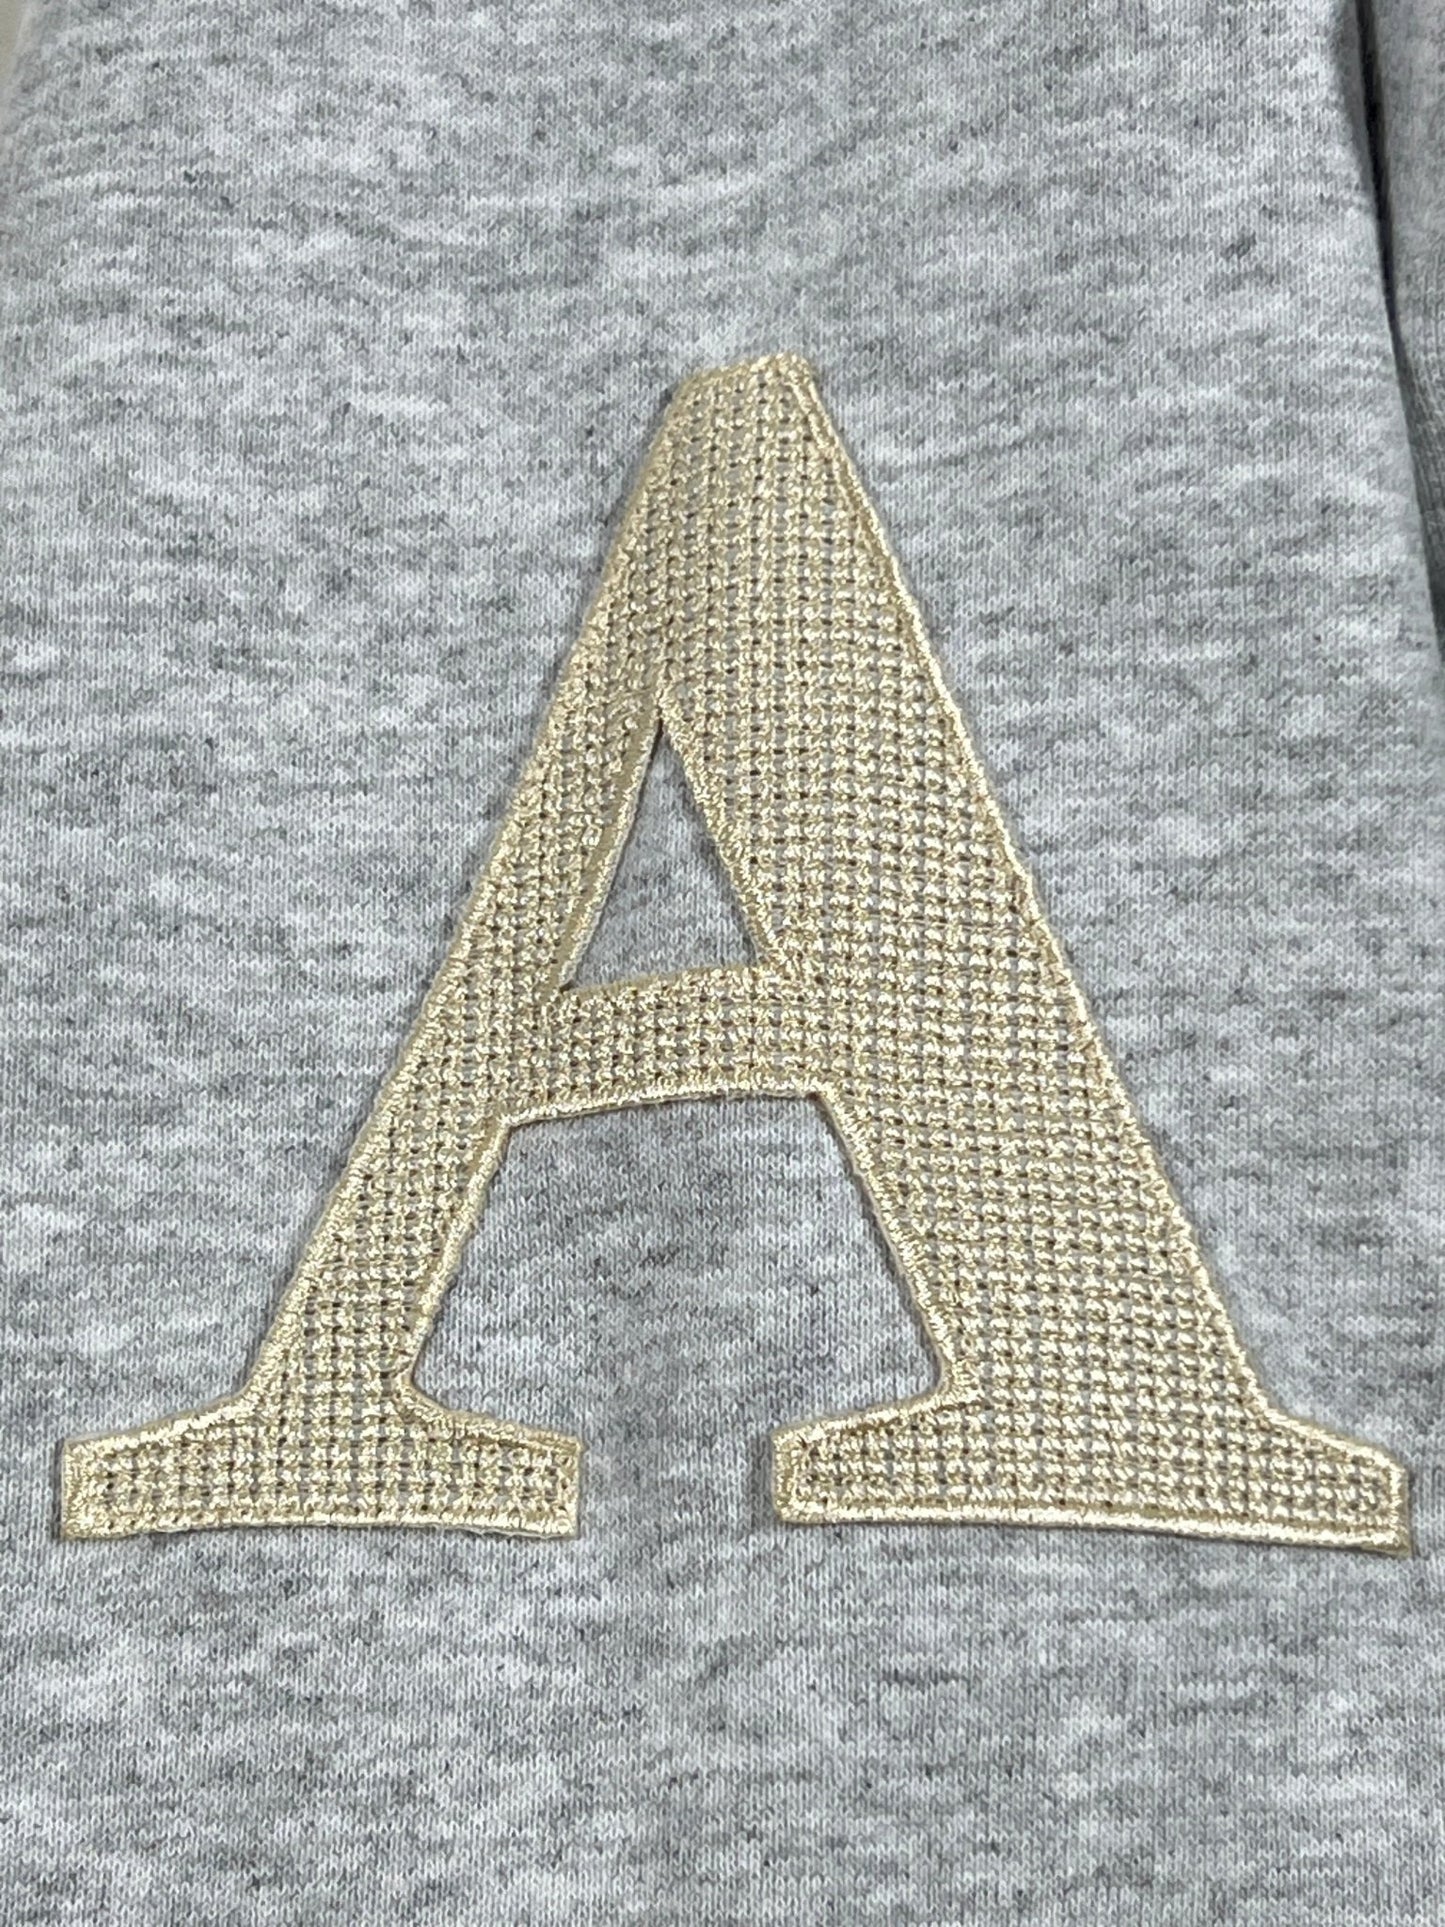 Close-up of a large, embroidered letter "A" in beige thread on a textured, grey AL AIN AHOX S150 YACHT LIMITED hoodie fabric background.